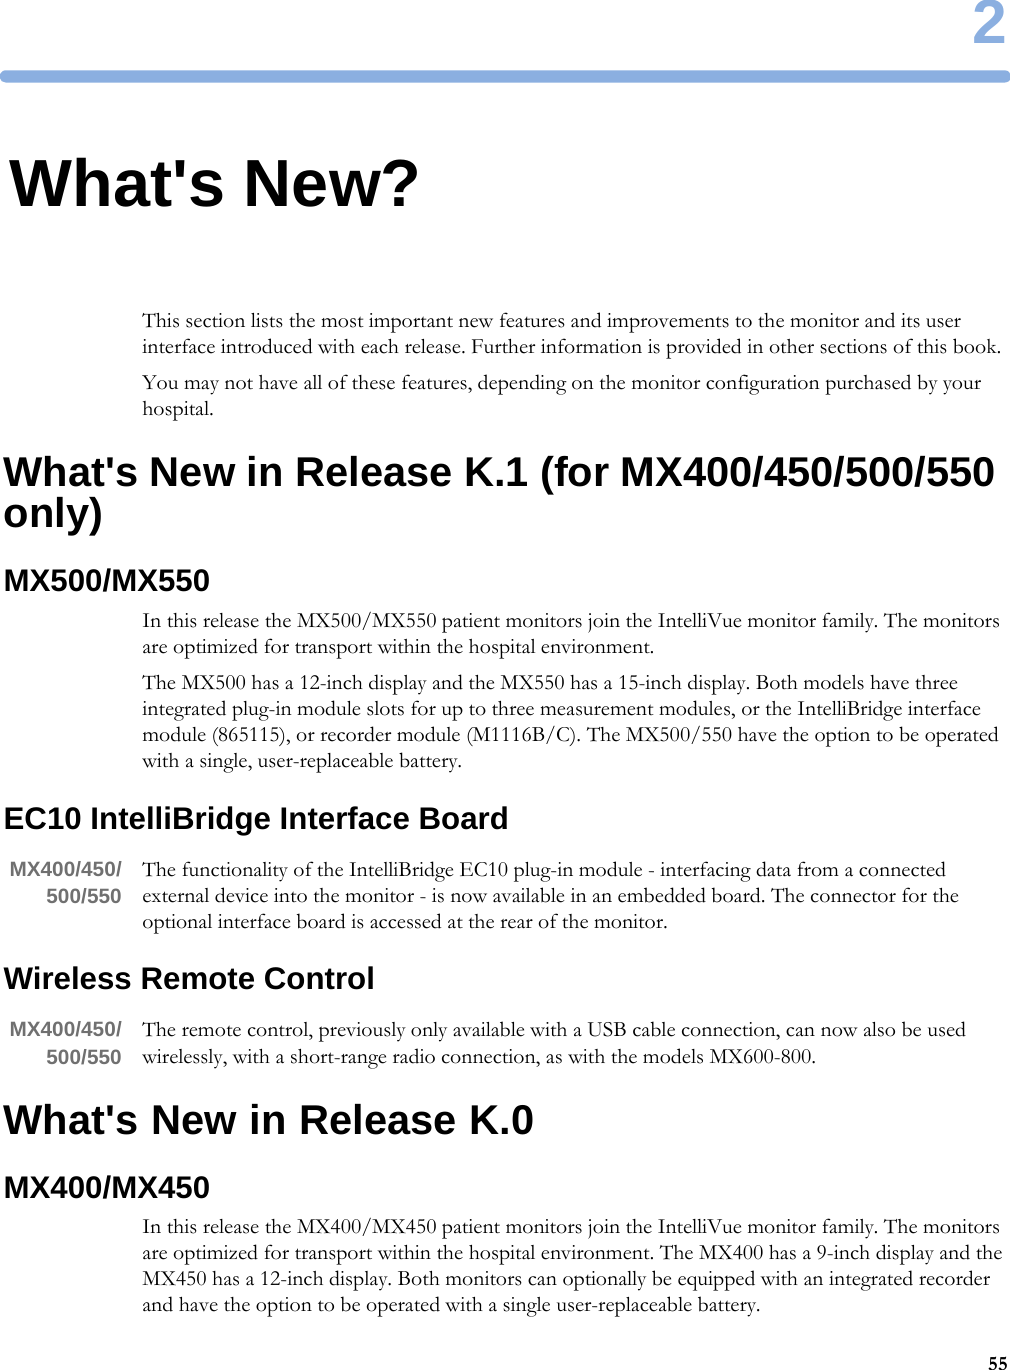 2552What&apos;s New?This section lists the most important new features and improvements to the monitor and its user interface introduced with each release. Further information is provided in other sections of this book.You may not have all of these features, depending on the monitor configuration purchased by your hospital.What&apos;s New in Release K.1 (for MX400/450/500/550 only)MX500/MX550In this release the MX500/MX550 patient monitors join the IntelliVue monitor family. The monitors are optimized for transport within the hospital environment.The MX500 has a 12-inch display and the MX550 has a 15-inch display. Both models have three integrated plug-in module slots for up to three measurement modules, or the IntelliBridge interface module (865115), or recorder module (M1116B/C). The MX500/550 have the option to be operated with a single, user-replaceable battery.EC10 IntelliBridge Interface BoardMX400/450/500/550 The functionality of the IntelliBridge EC10 plug-in module - interfacing data from a connected external device into the monitor - is now available in an embedded board. The connector for the optional interface board is accessed at the rear of the monitor.Wireless Remote ControlMX400/450/500/550 The remote control, previously only available with a USB cable connection, can now also be used wirelessly, with a short-range radio connection, as with the models MX600-800.What&apos;s New in Release K.0MX400/MX450In this release the MX400/MX450 patient monitors join the IntelliVue monitor family. The monitors are optimized for transport within the hospital environment. The MX400 has a 9-inch display and the MX450 has a 12-inch display. Both monitors can optionally be equipped with an integrated recorder and have the option to be operated with a single user-replaceable battery.